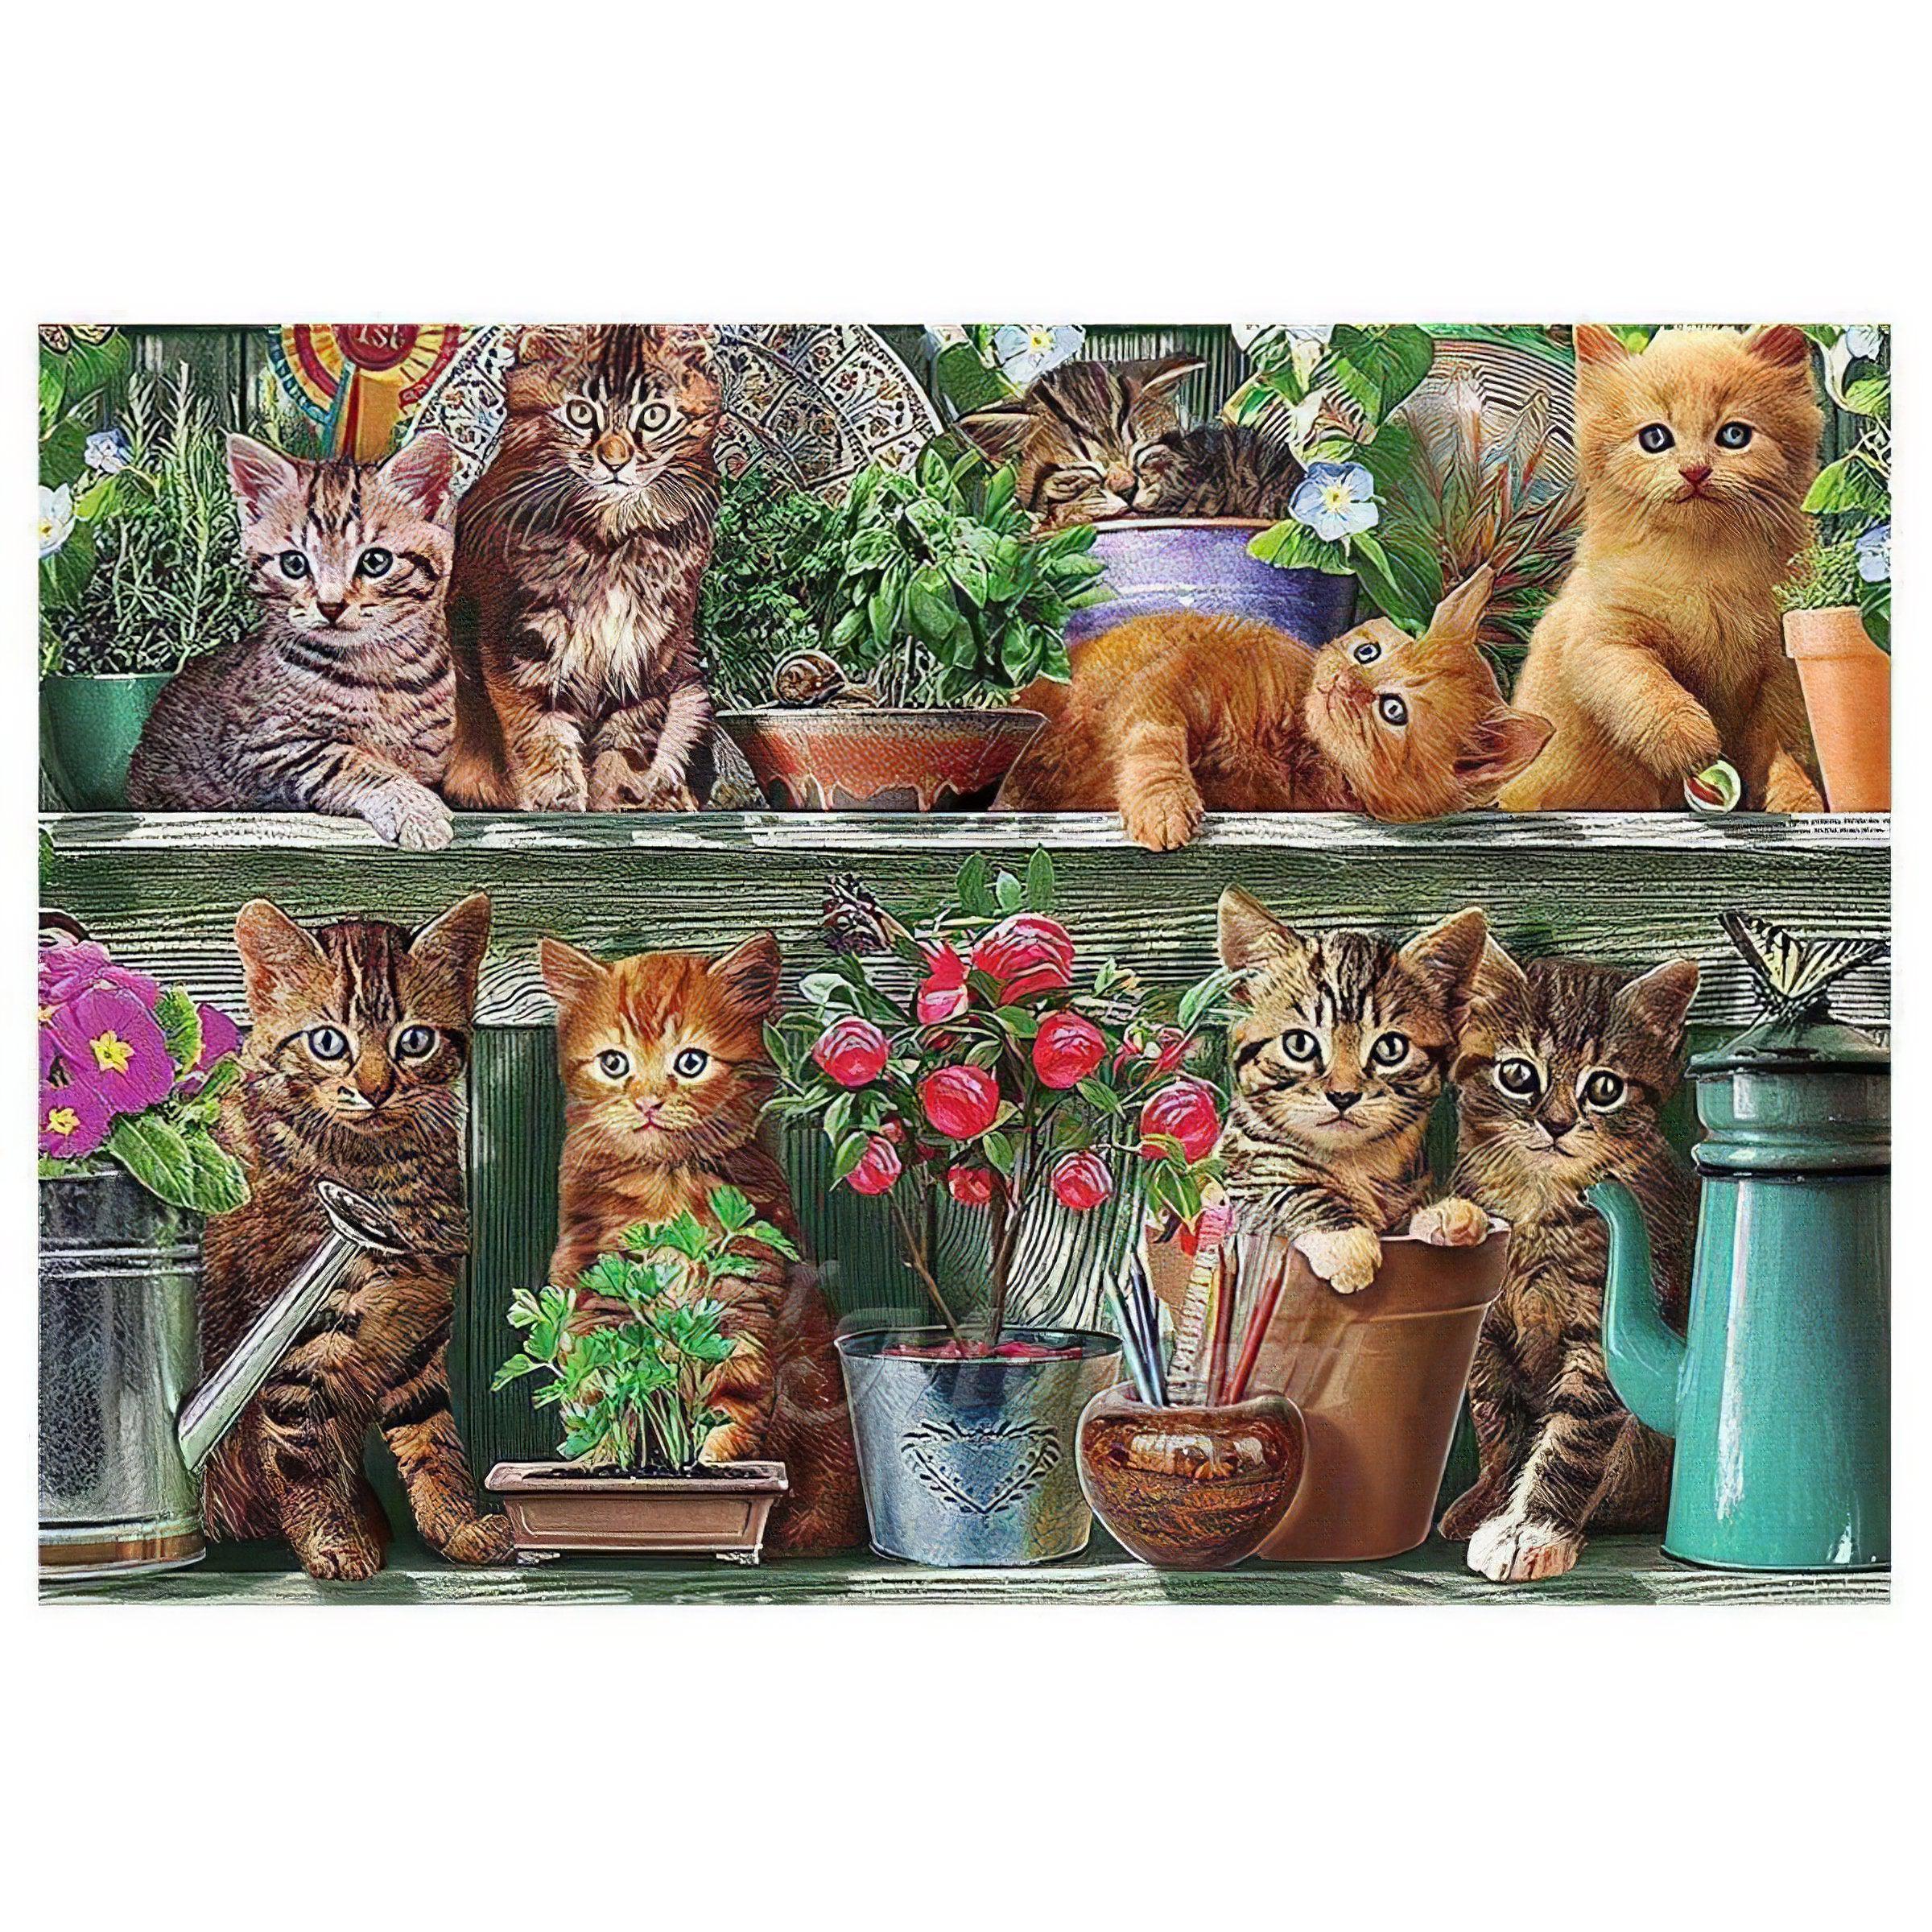 Cats amidst greenery, exploring and lounging, a peaceful coexistence of nature and nurture. Cats With Plants - Diamondartlove